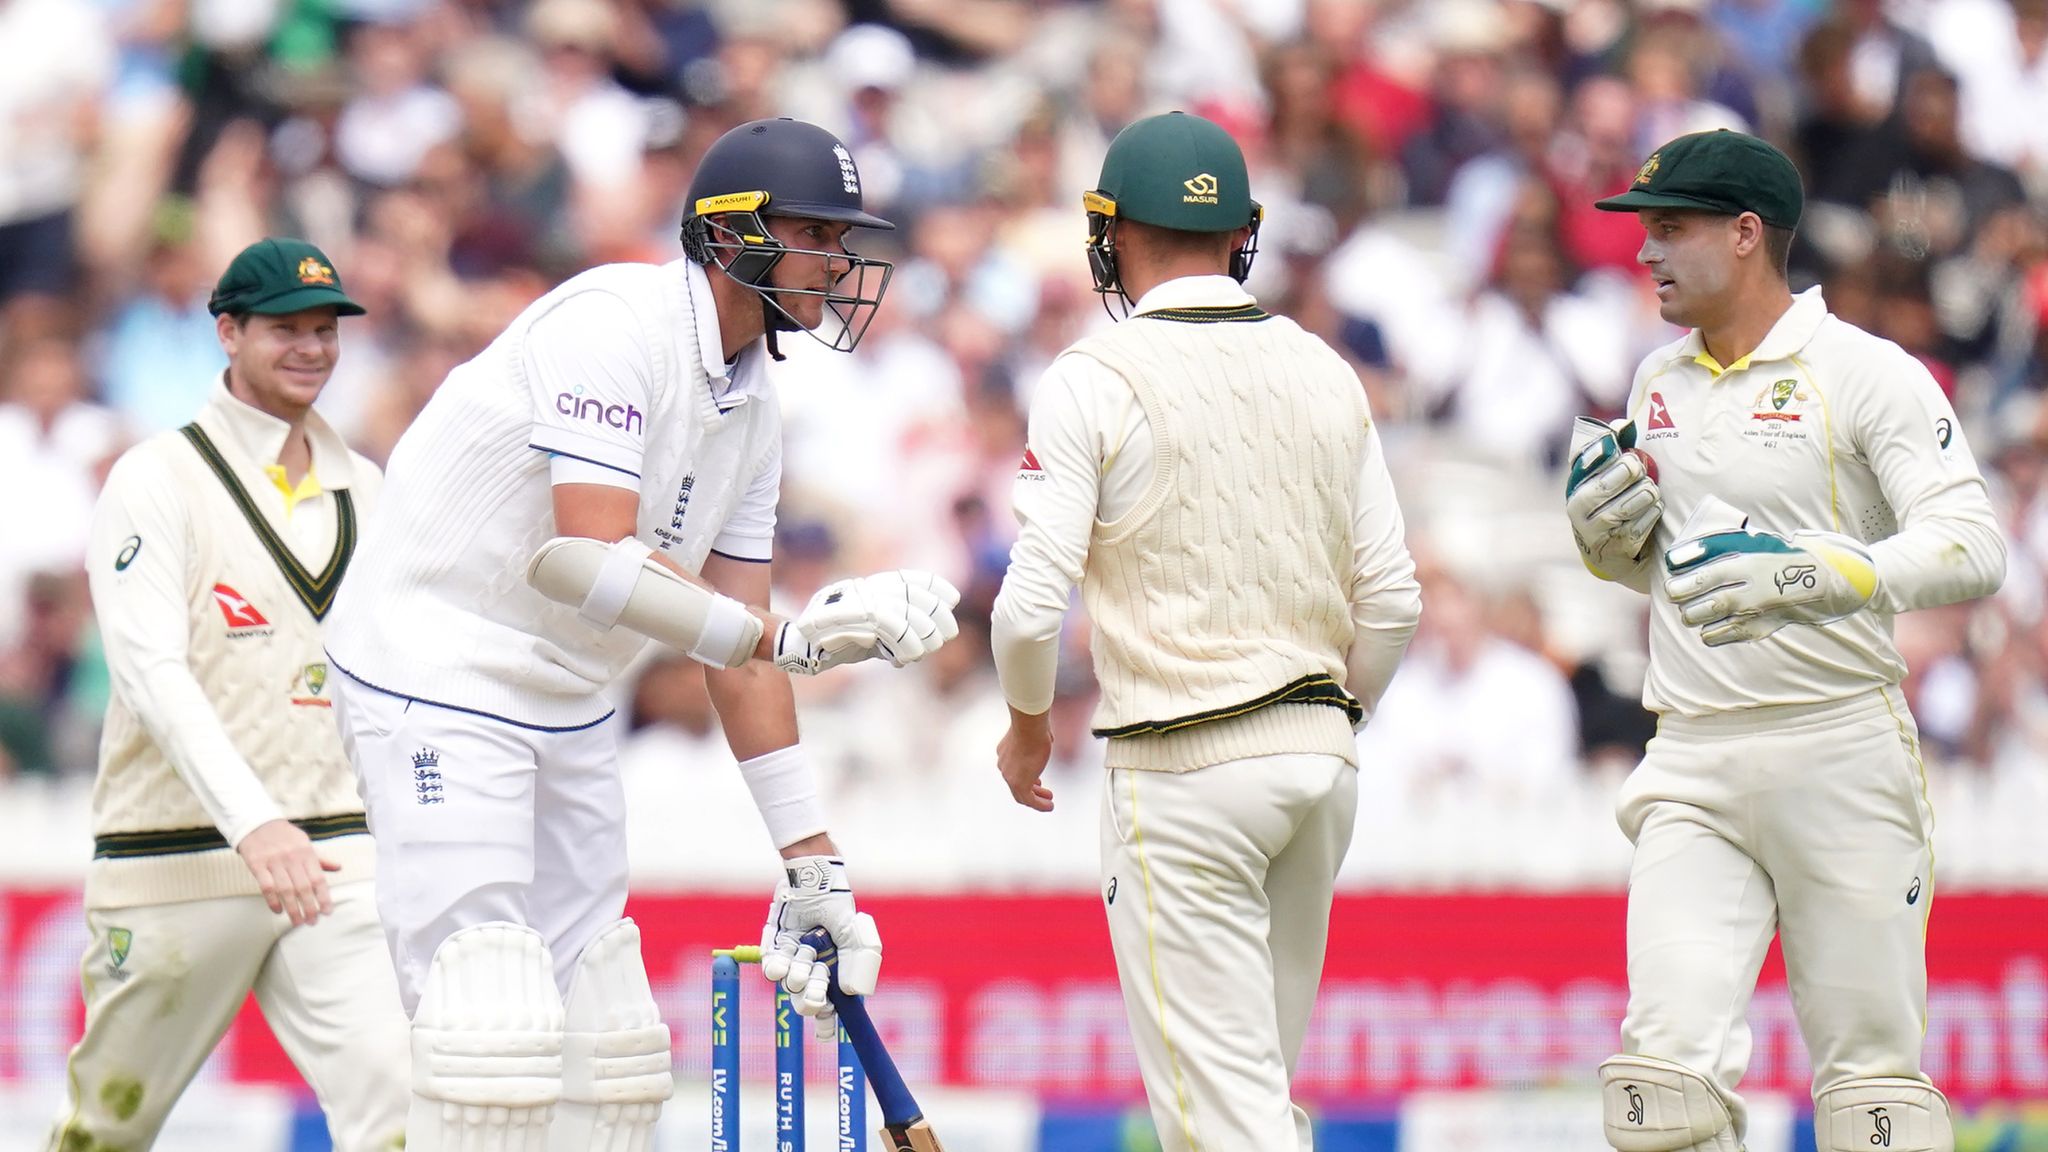 The Ashes Preview: Australia journey to Headingley in search of series win